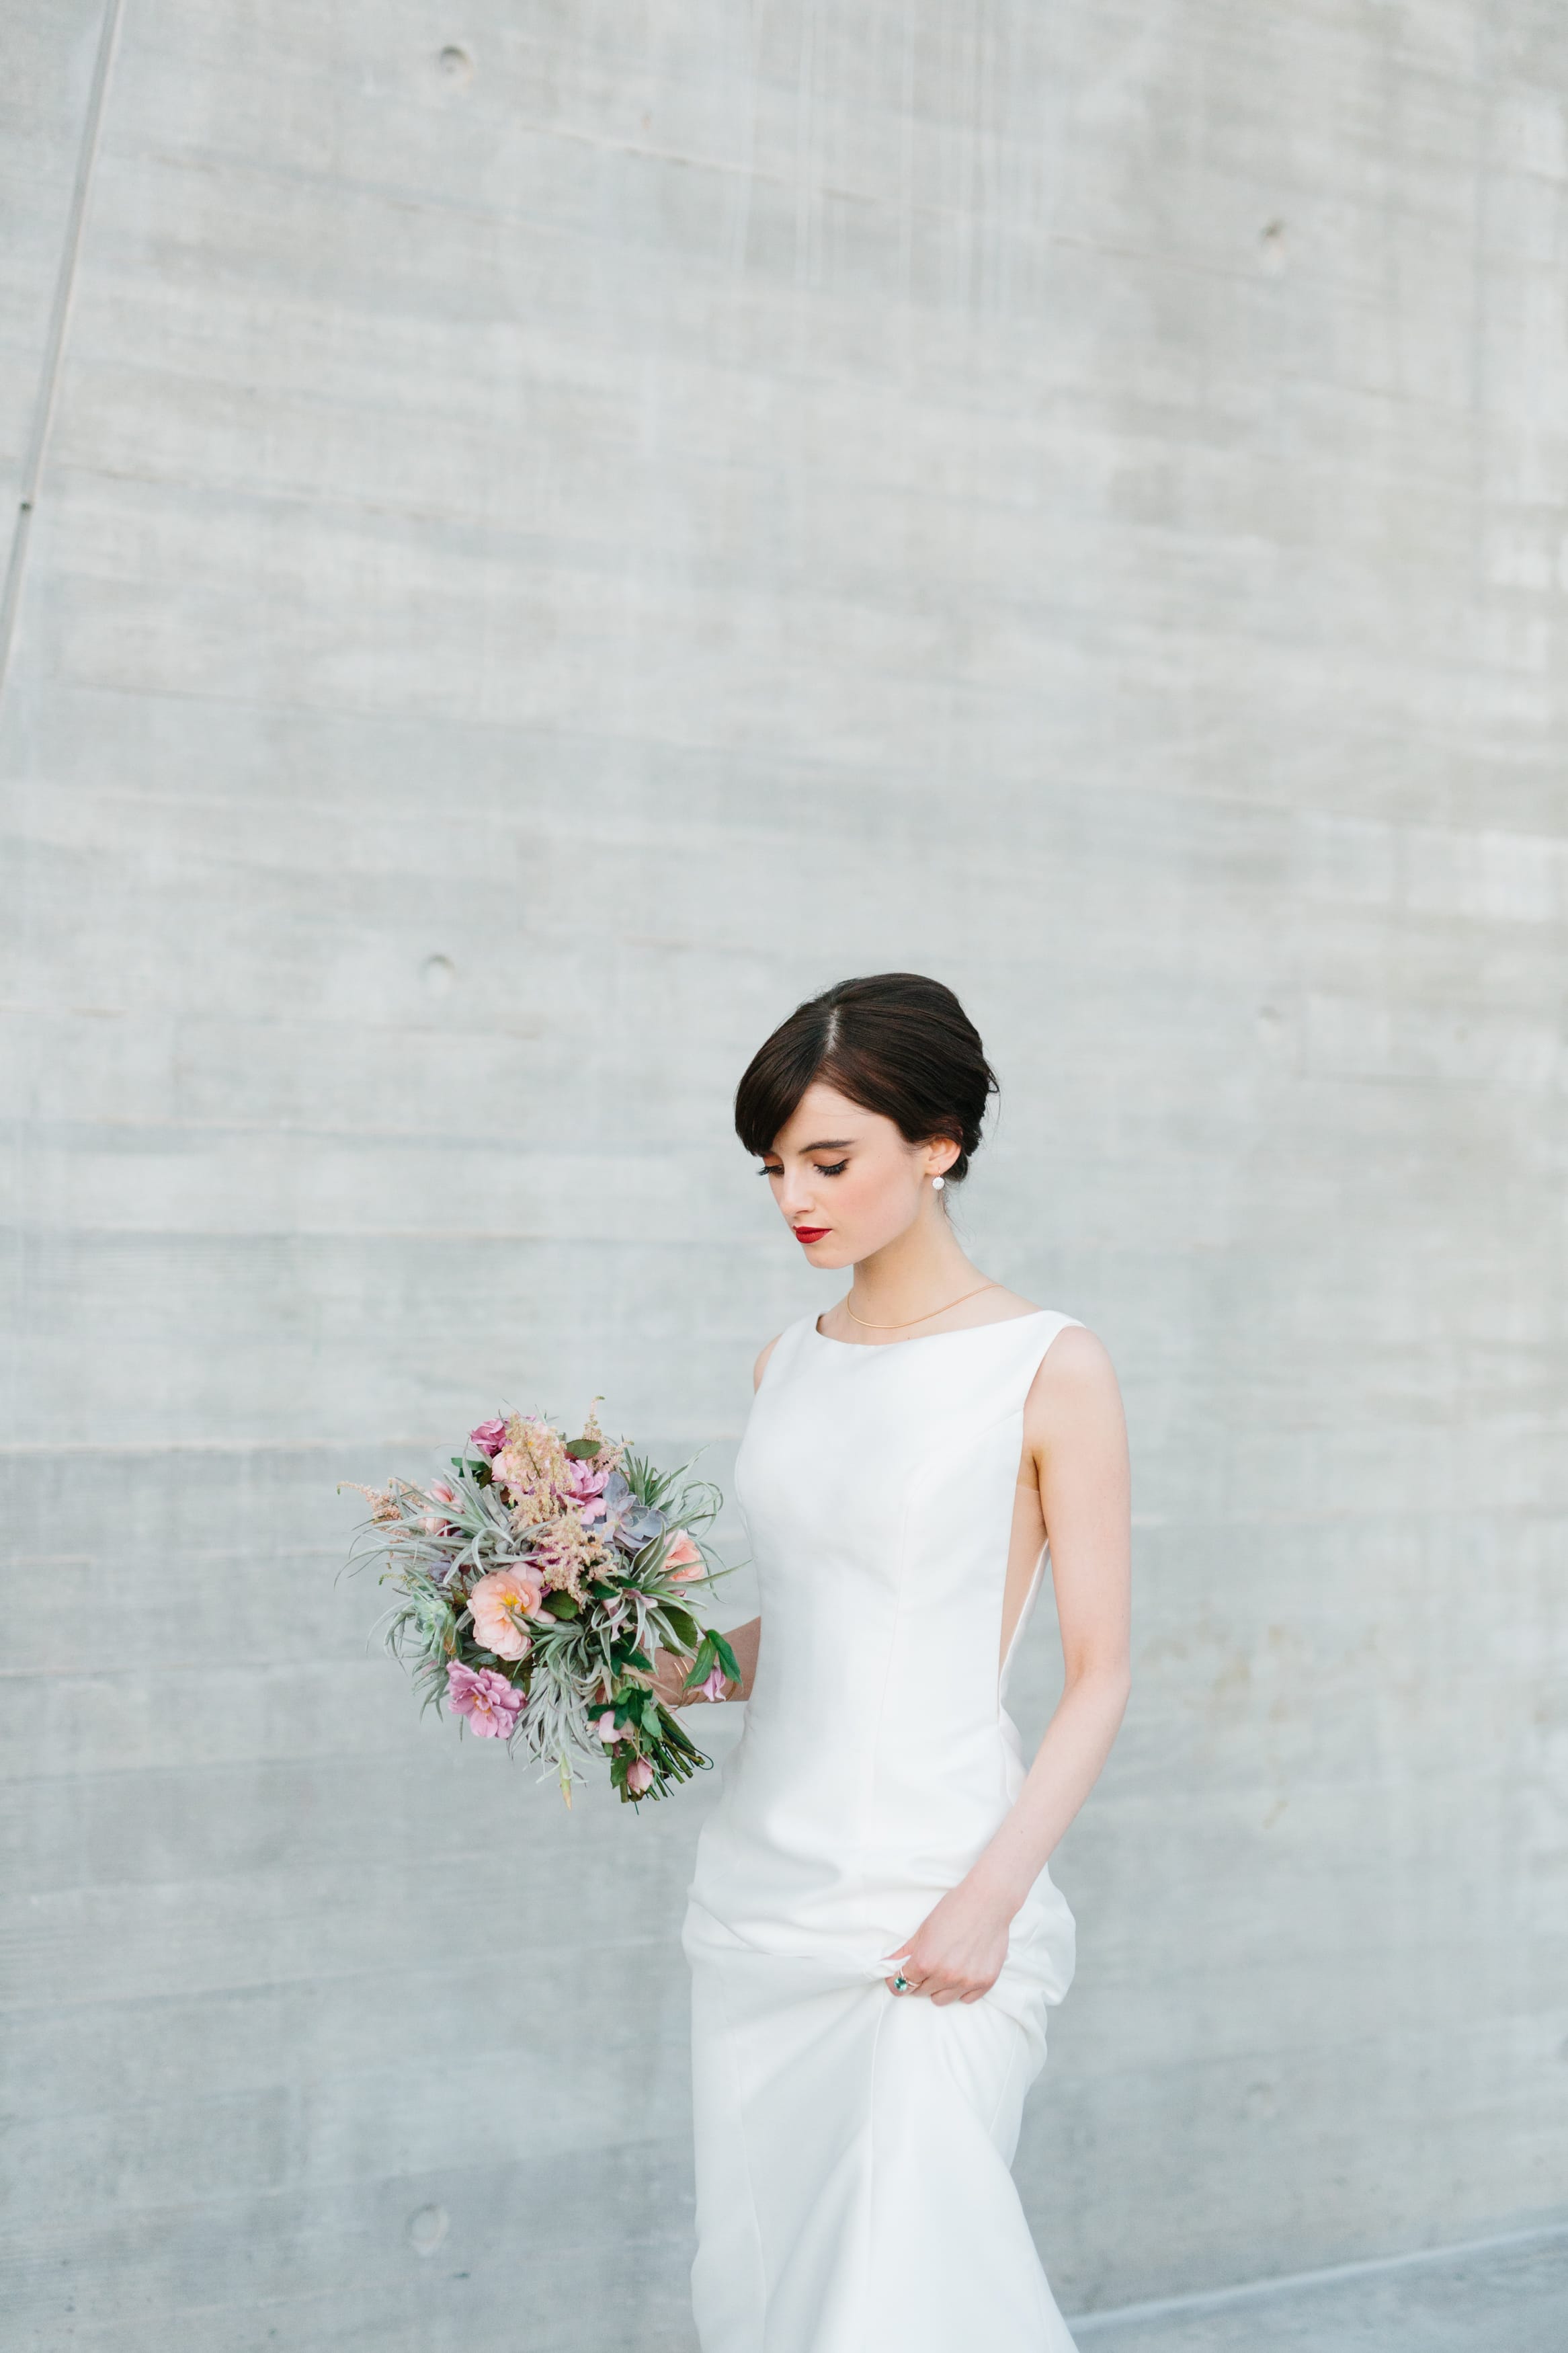 Elegant Industrial Styled Shoot at Natural History Museum - Cohen by Sottero & Midgley.